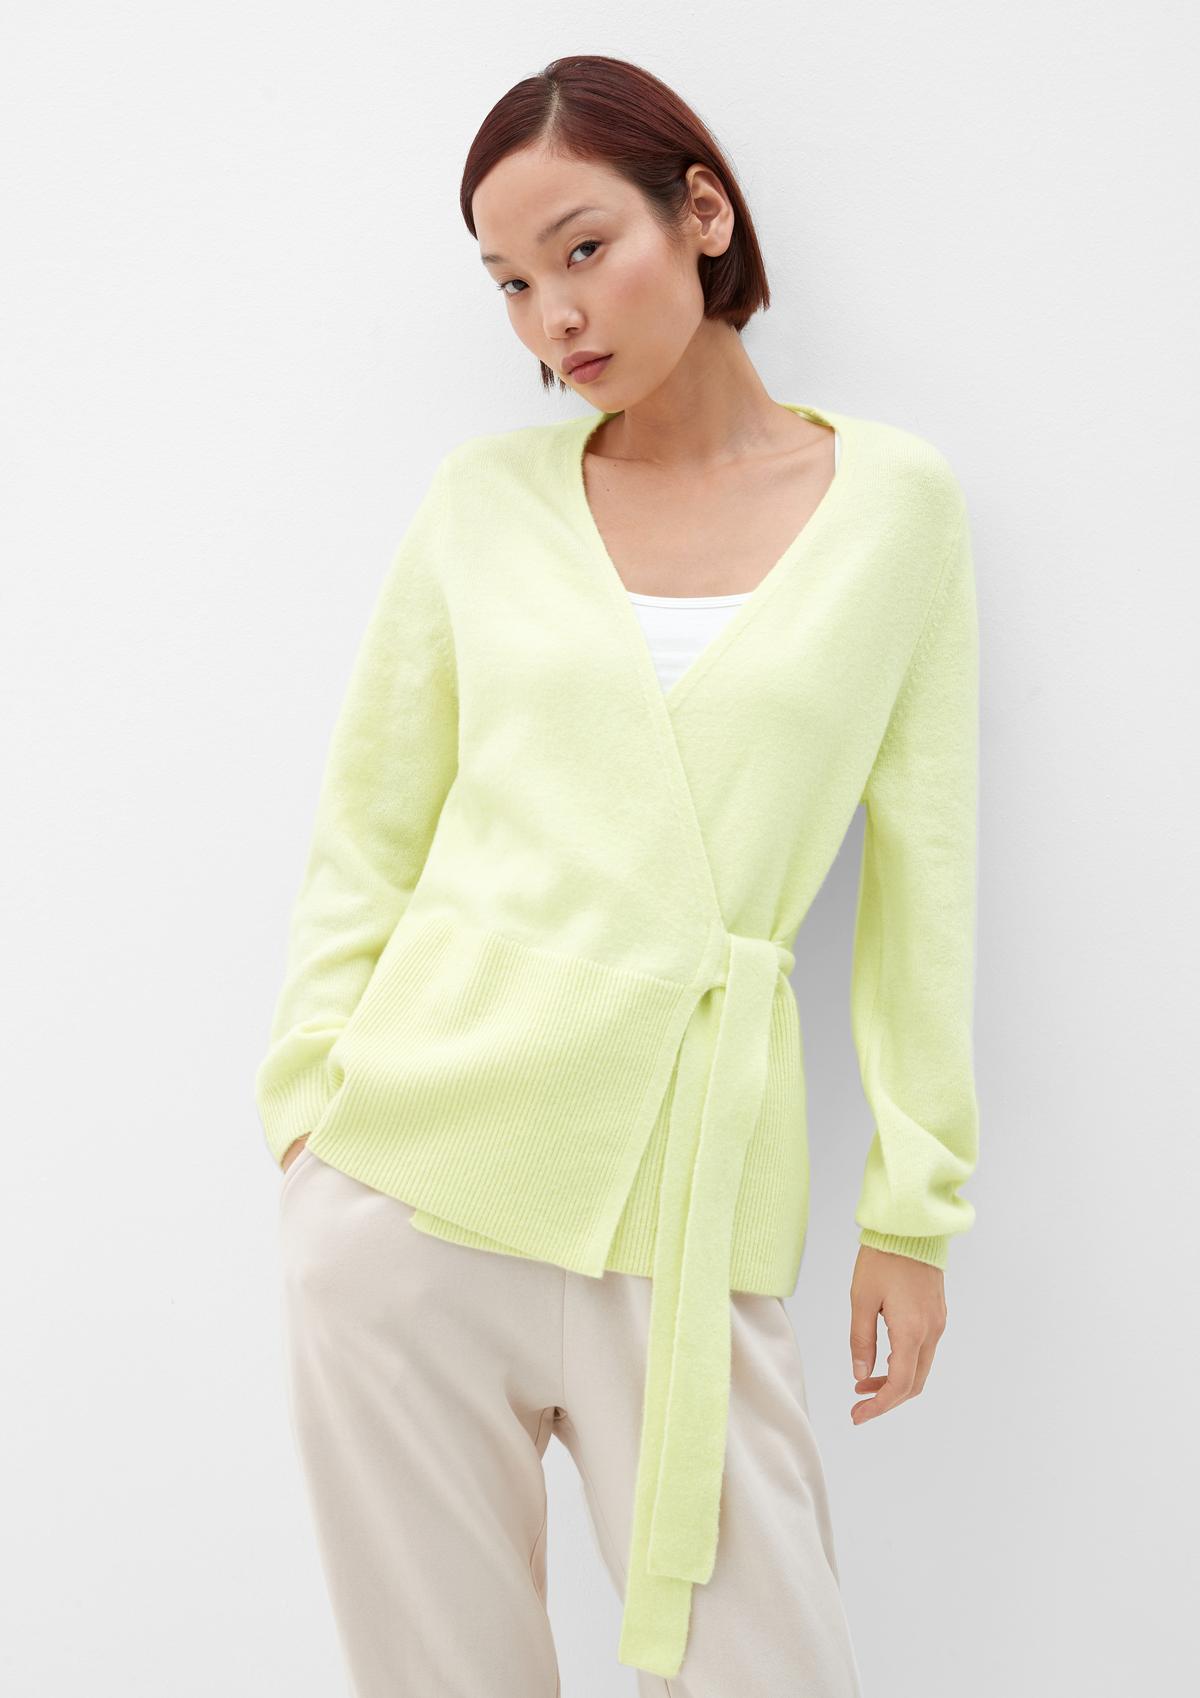 Cardigan with ties - lime green